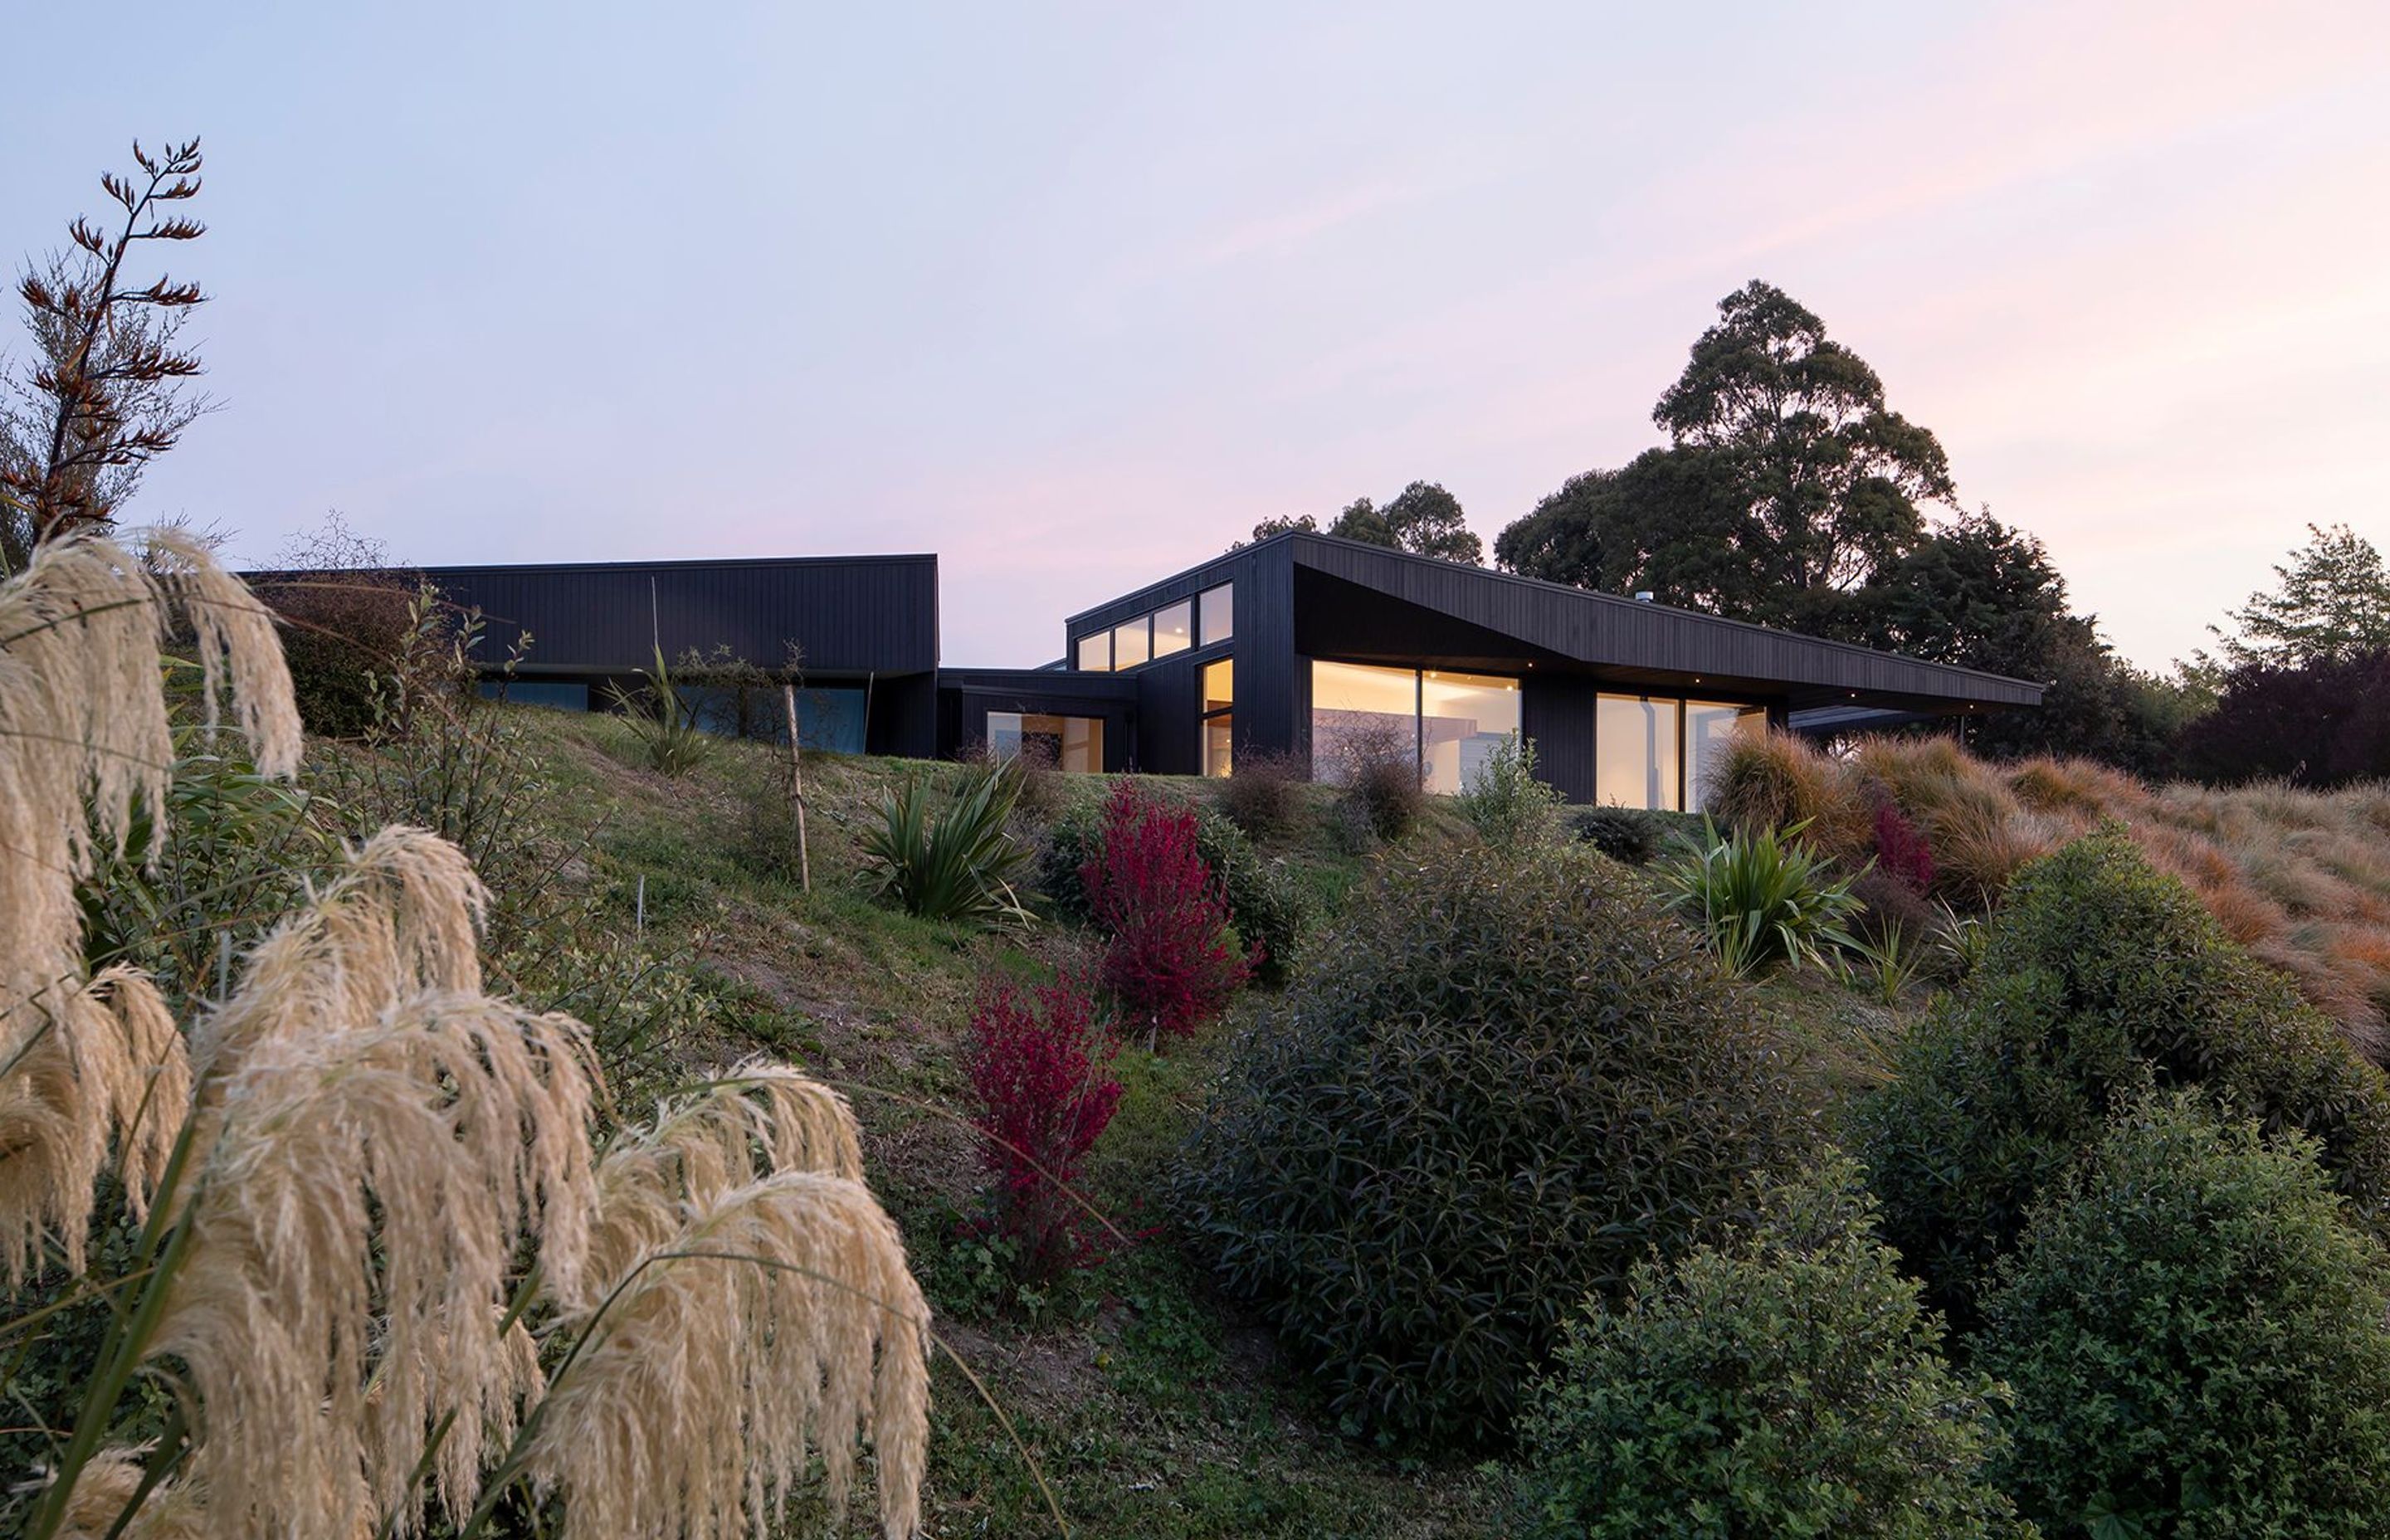 Vineyard House is a simple, sculptured form that is cranked to face the morning sun.